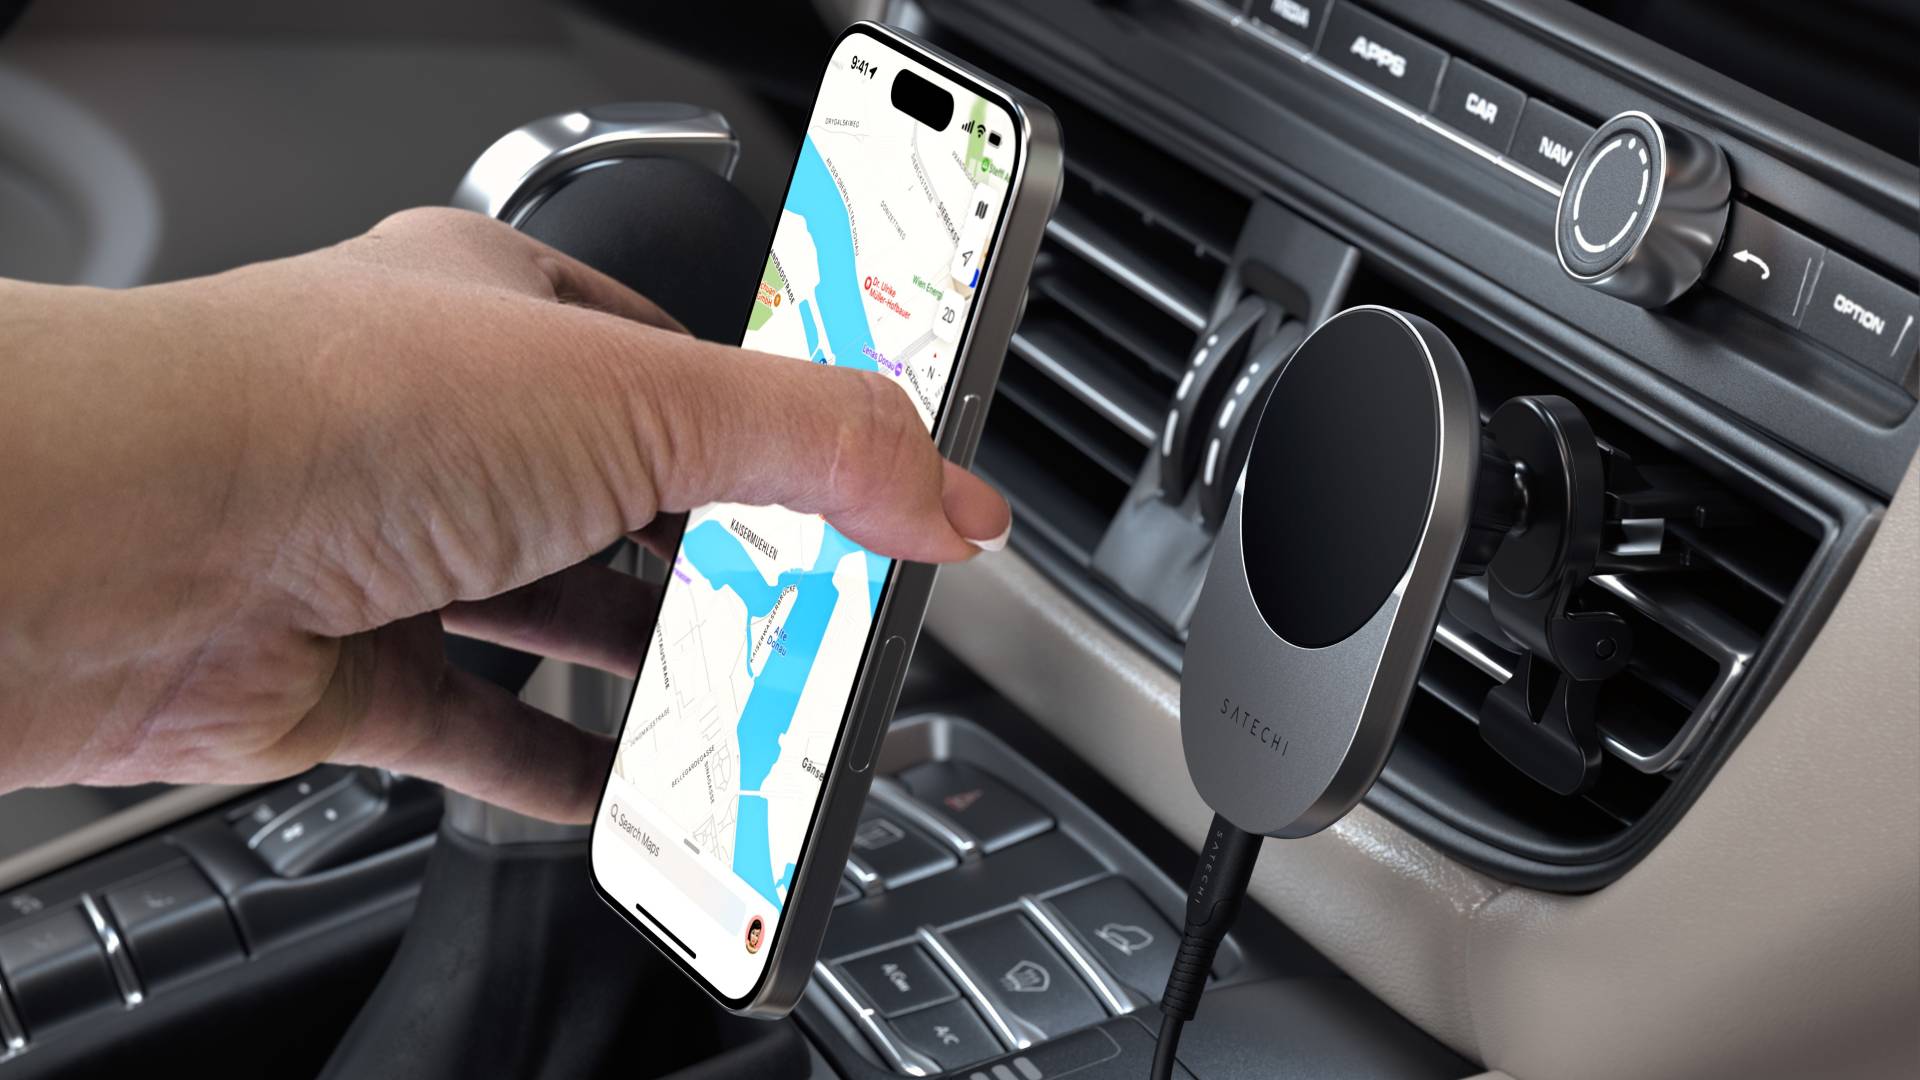 Person placing an iPhone on a Satechi Qi2 wireless charger mounted on a car's AC vent.